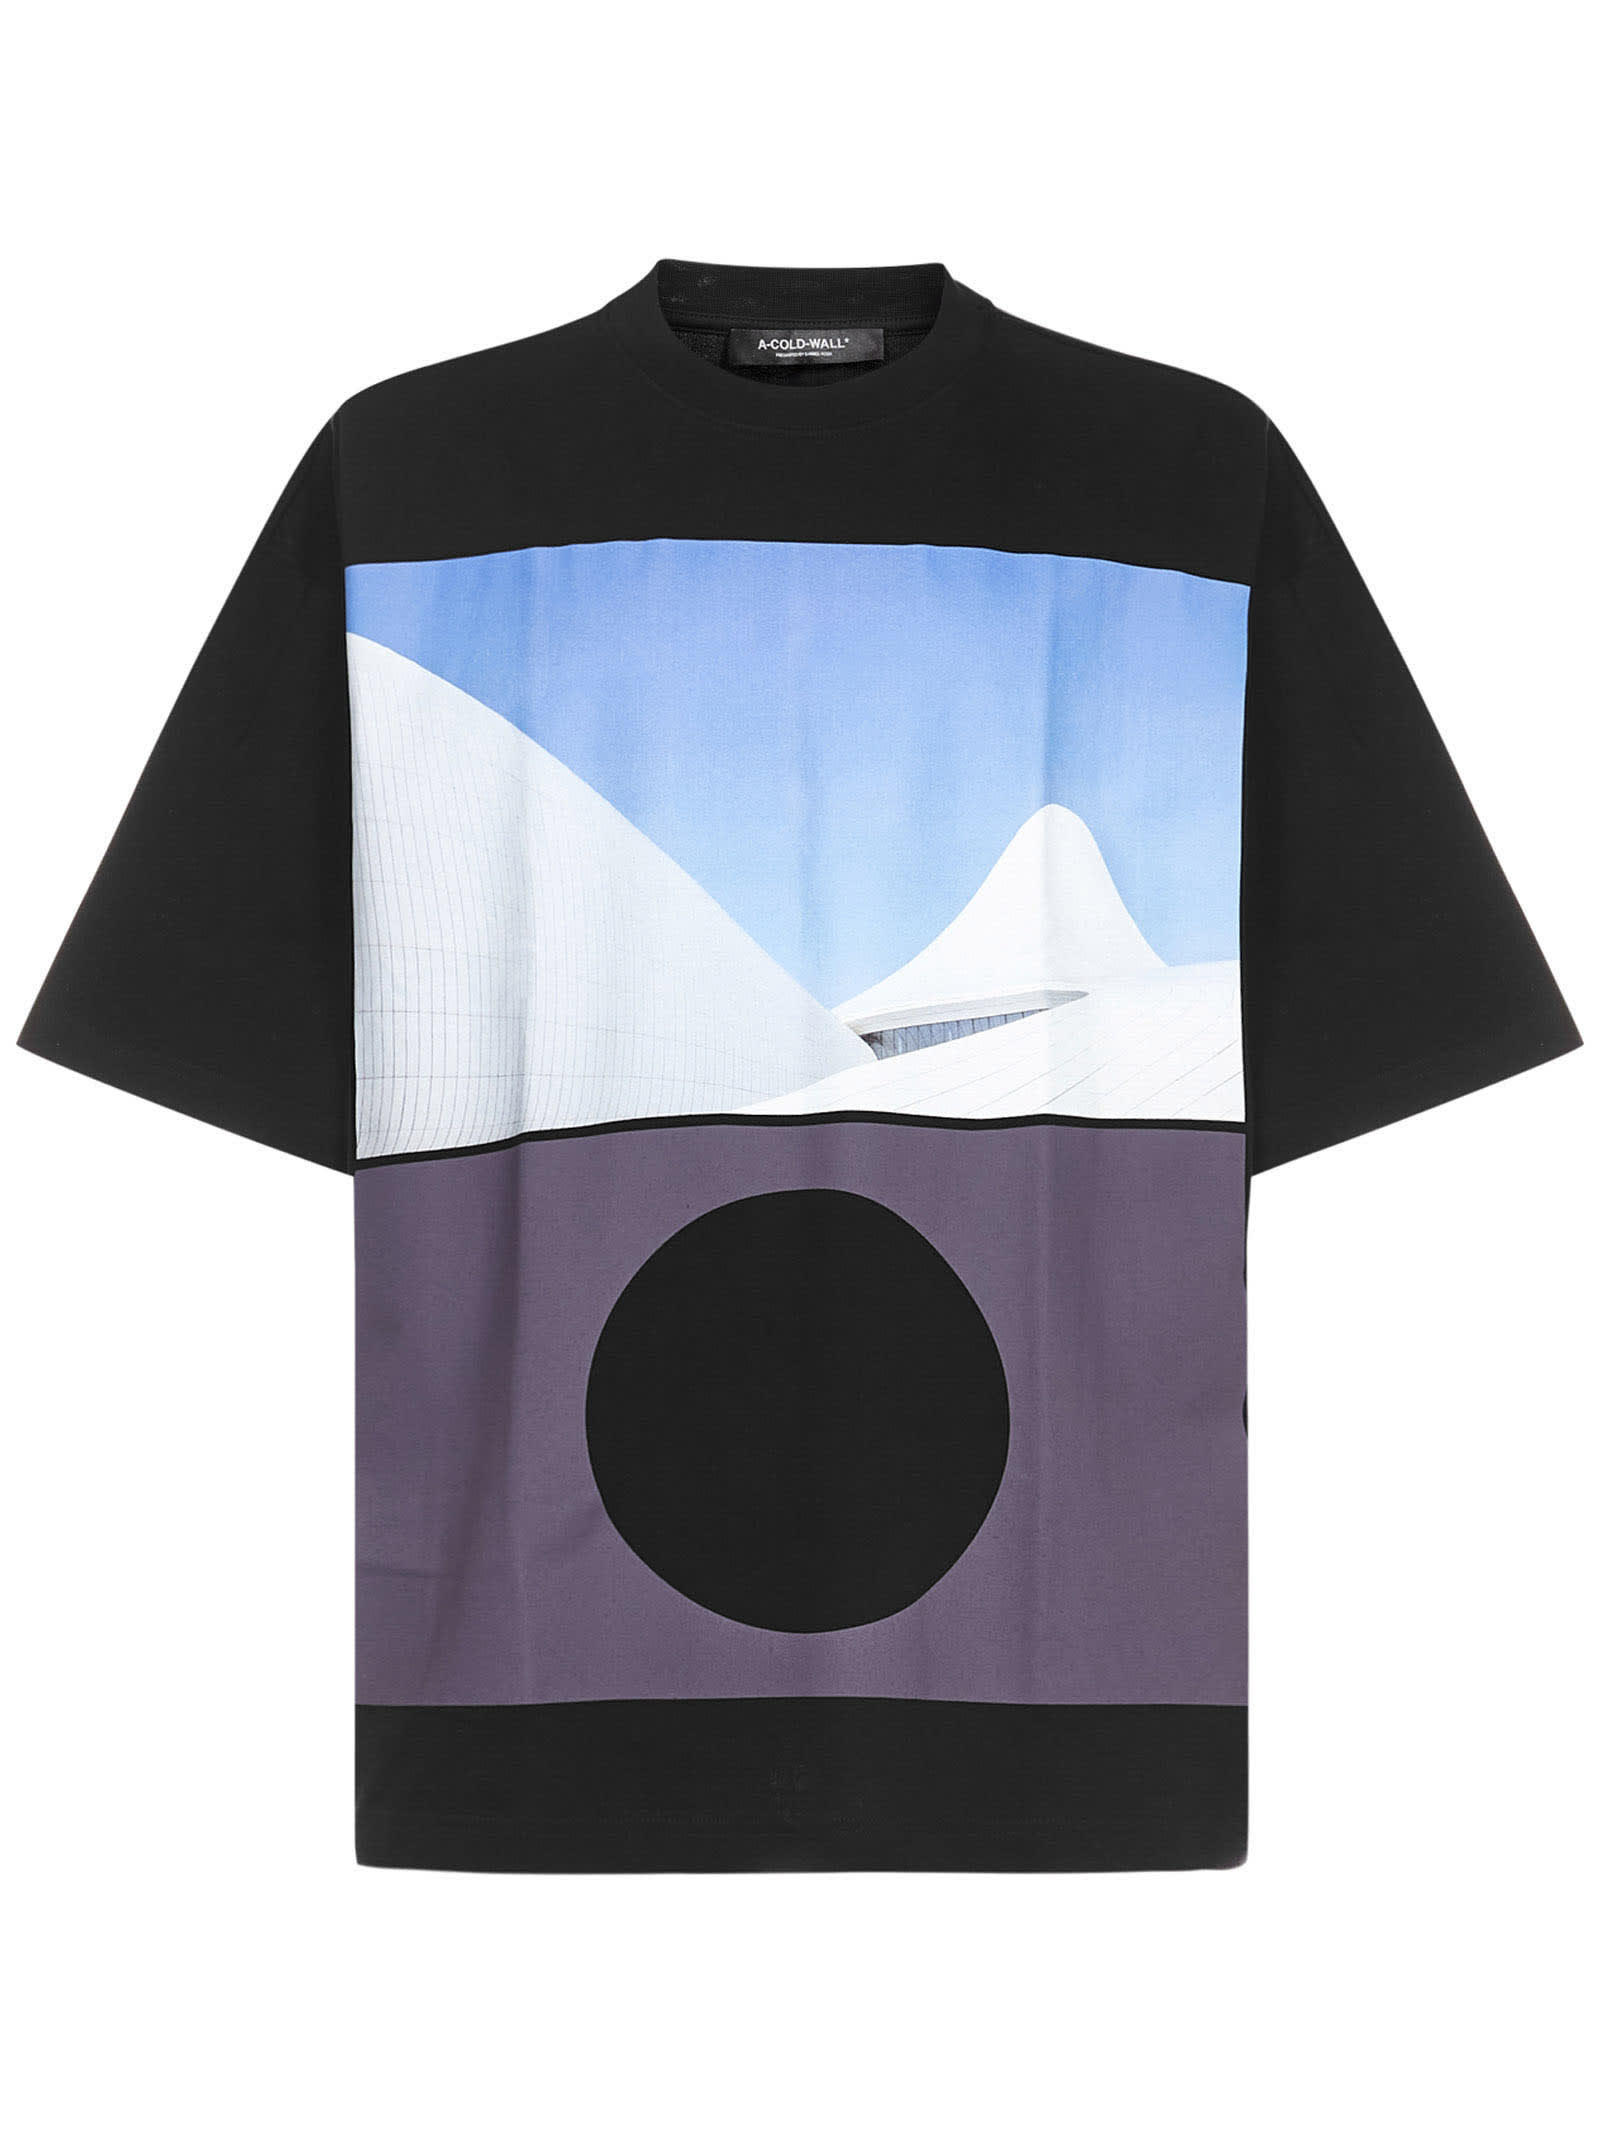 A-COLD-WALL A Cold Wall Niemeyer T-shirt